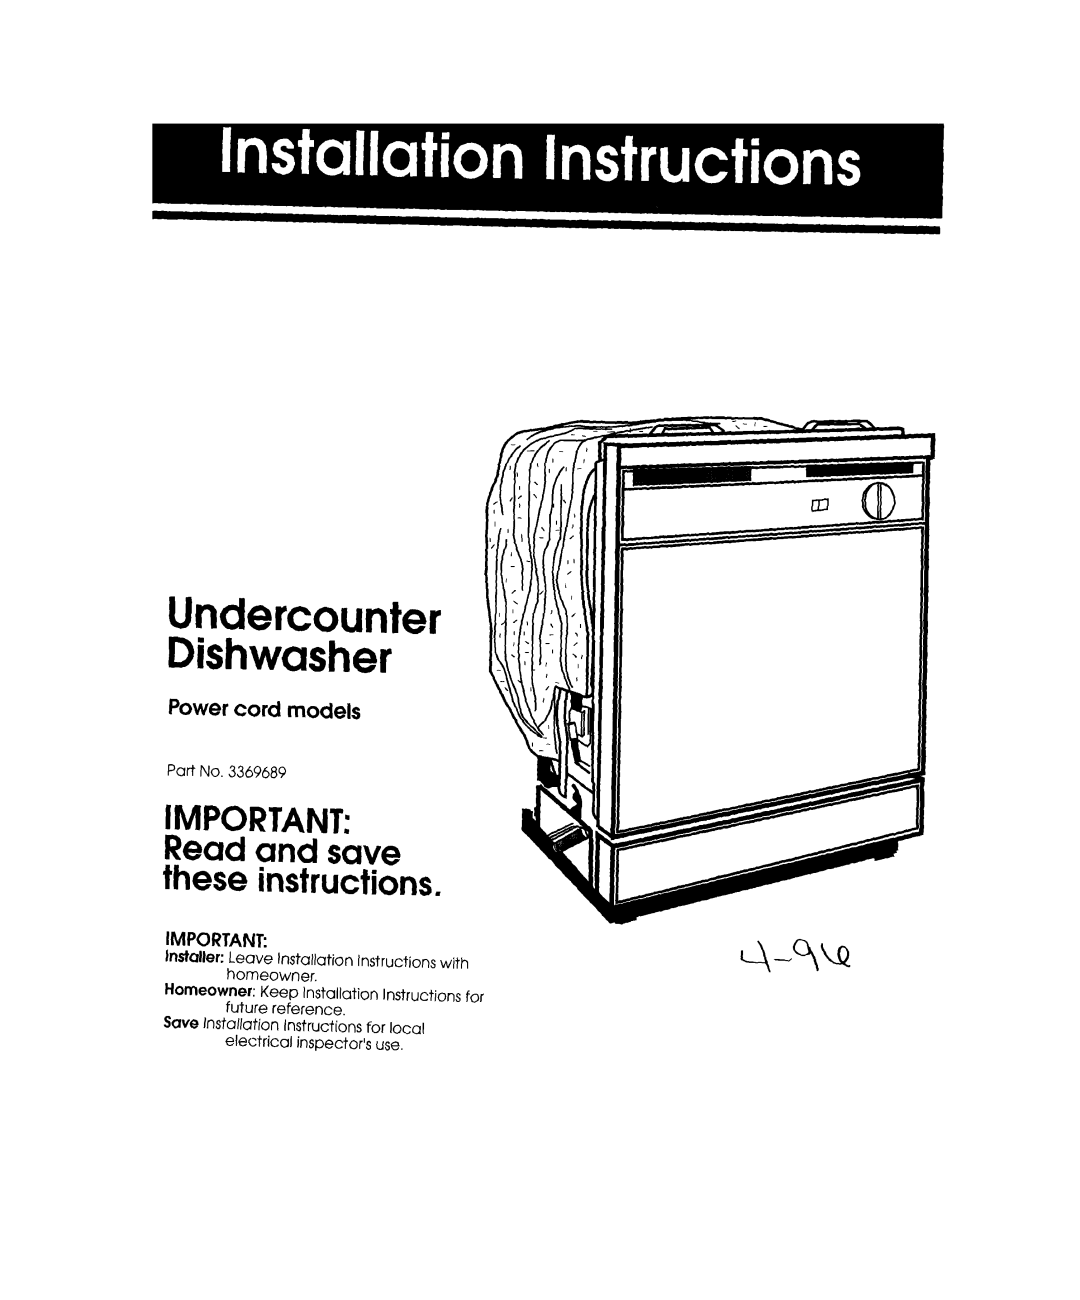 Whirlpool 801 installation instructions Read and save these instructions, Power cord models, homeowner, future reference 